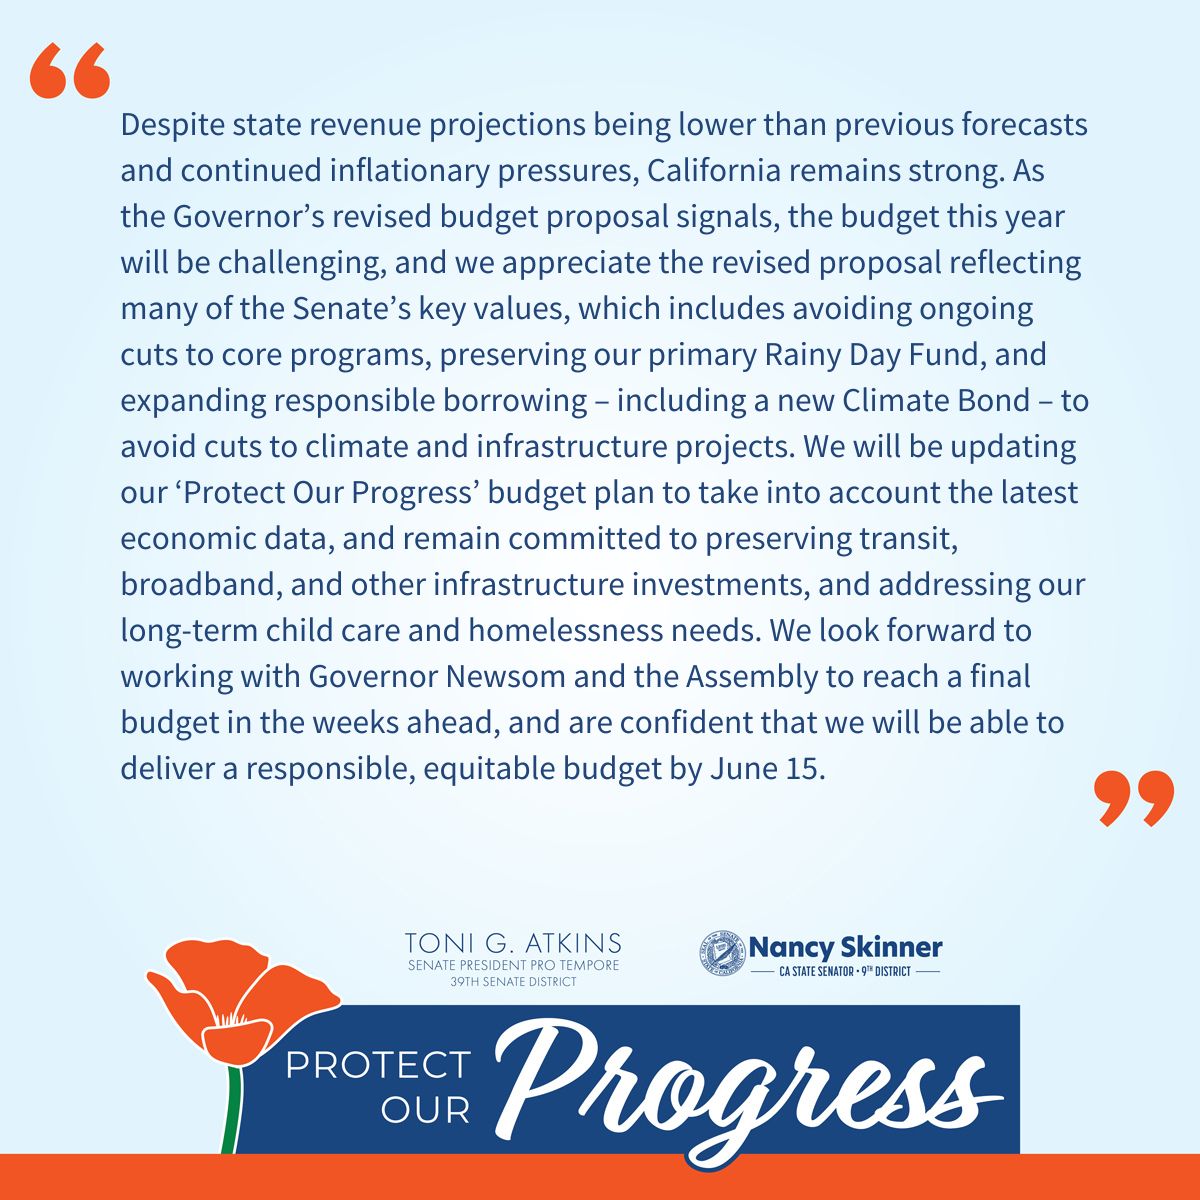 Senate Budget Chair @NancySkinnerCA and I are committed to working with our Senate colleagues, @CAGovernor, and the Assembly to reach a final #CABudget agreement that will #ProtectOurProgress.